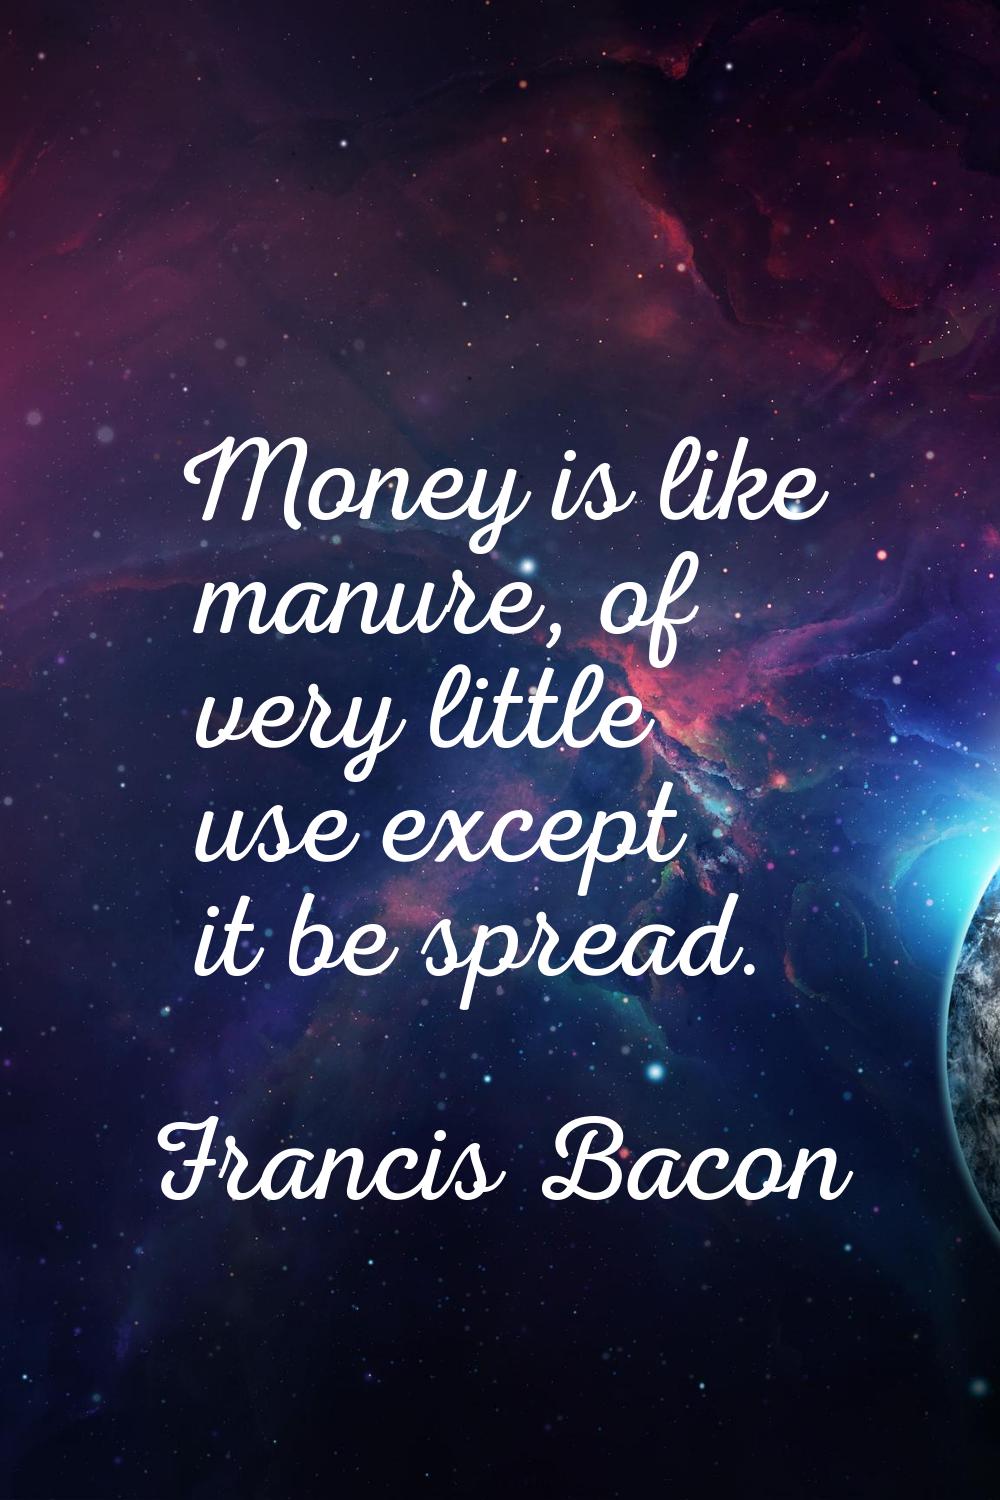 Money is like manure, of very little use except it be spread.